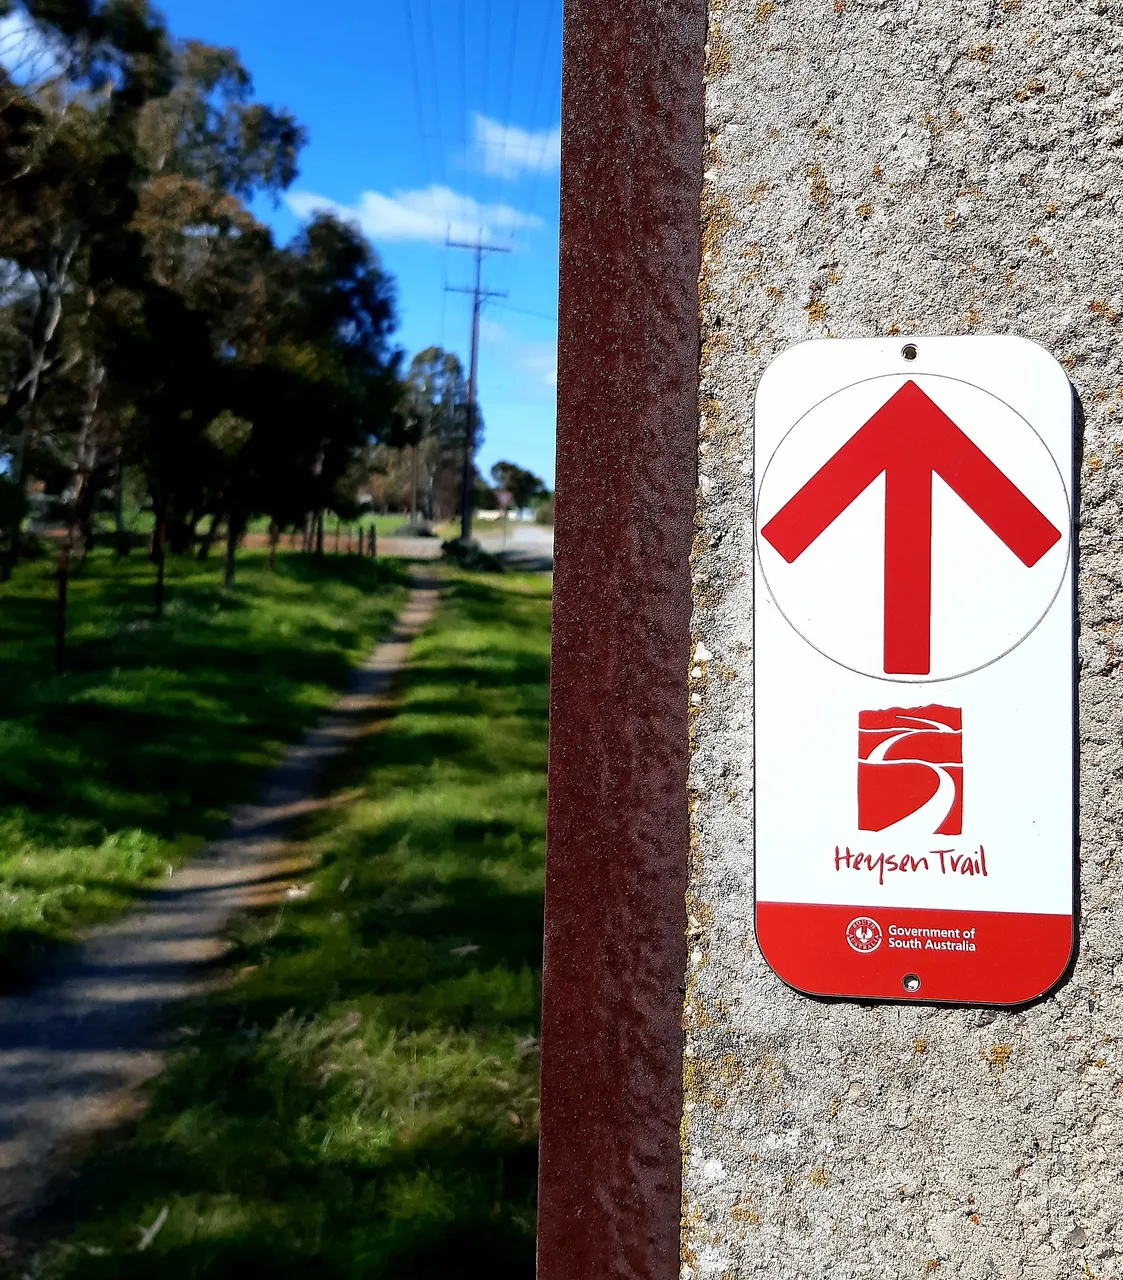 Heysen Trail sign and track in Spalding